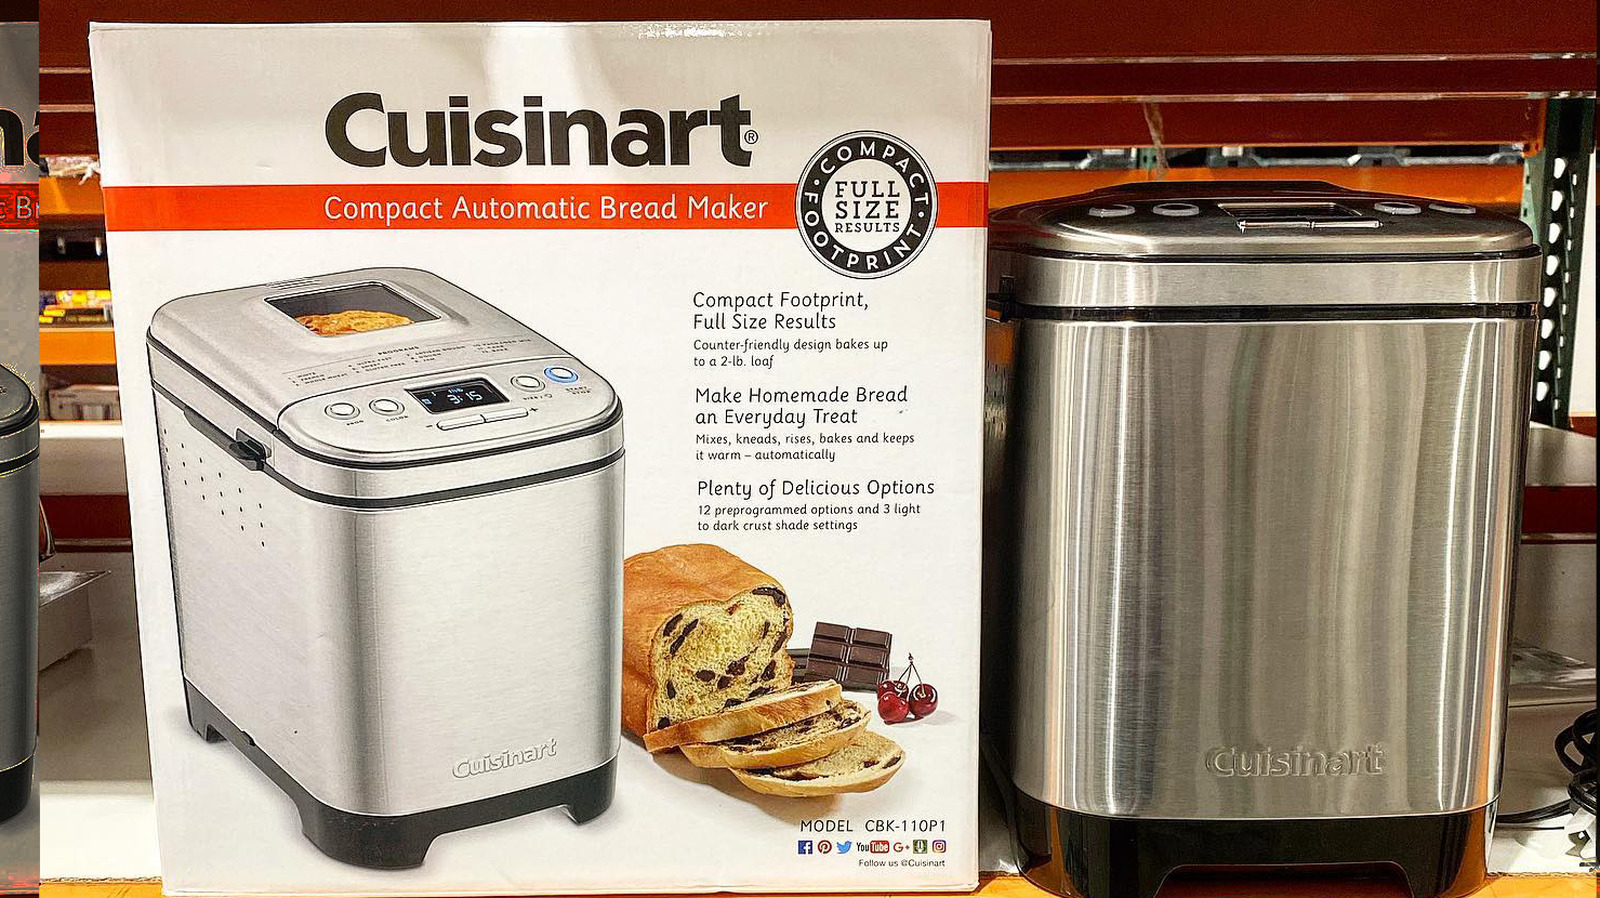 https://www.mashed.com/img/gallery/this-cuisinart-bread-maker-on-sale-at-costco-is-a-total-steal/l-intro-1608653120.jpg